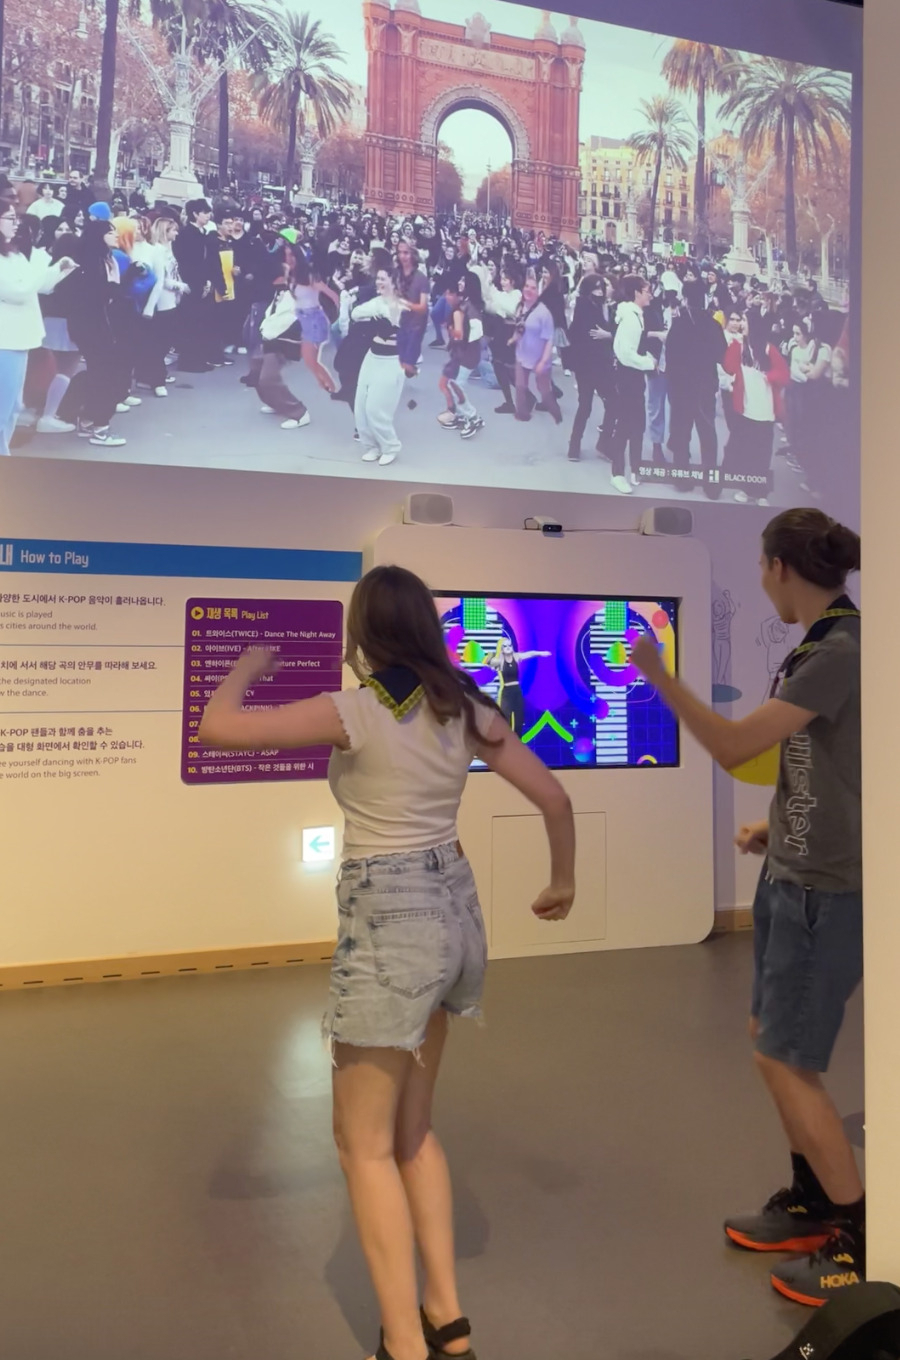 Visitors dance along with videos of K-pop Random Play Dance that took place at many cities around the world at an exhibition titled “The Pop Culture We Loved and Rise of the Korean Wave